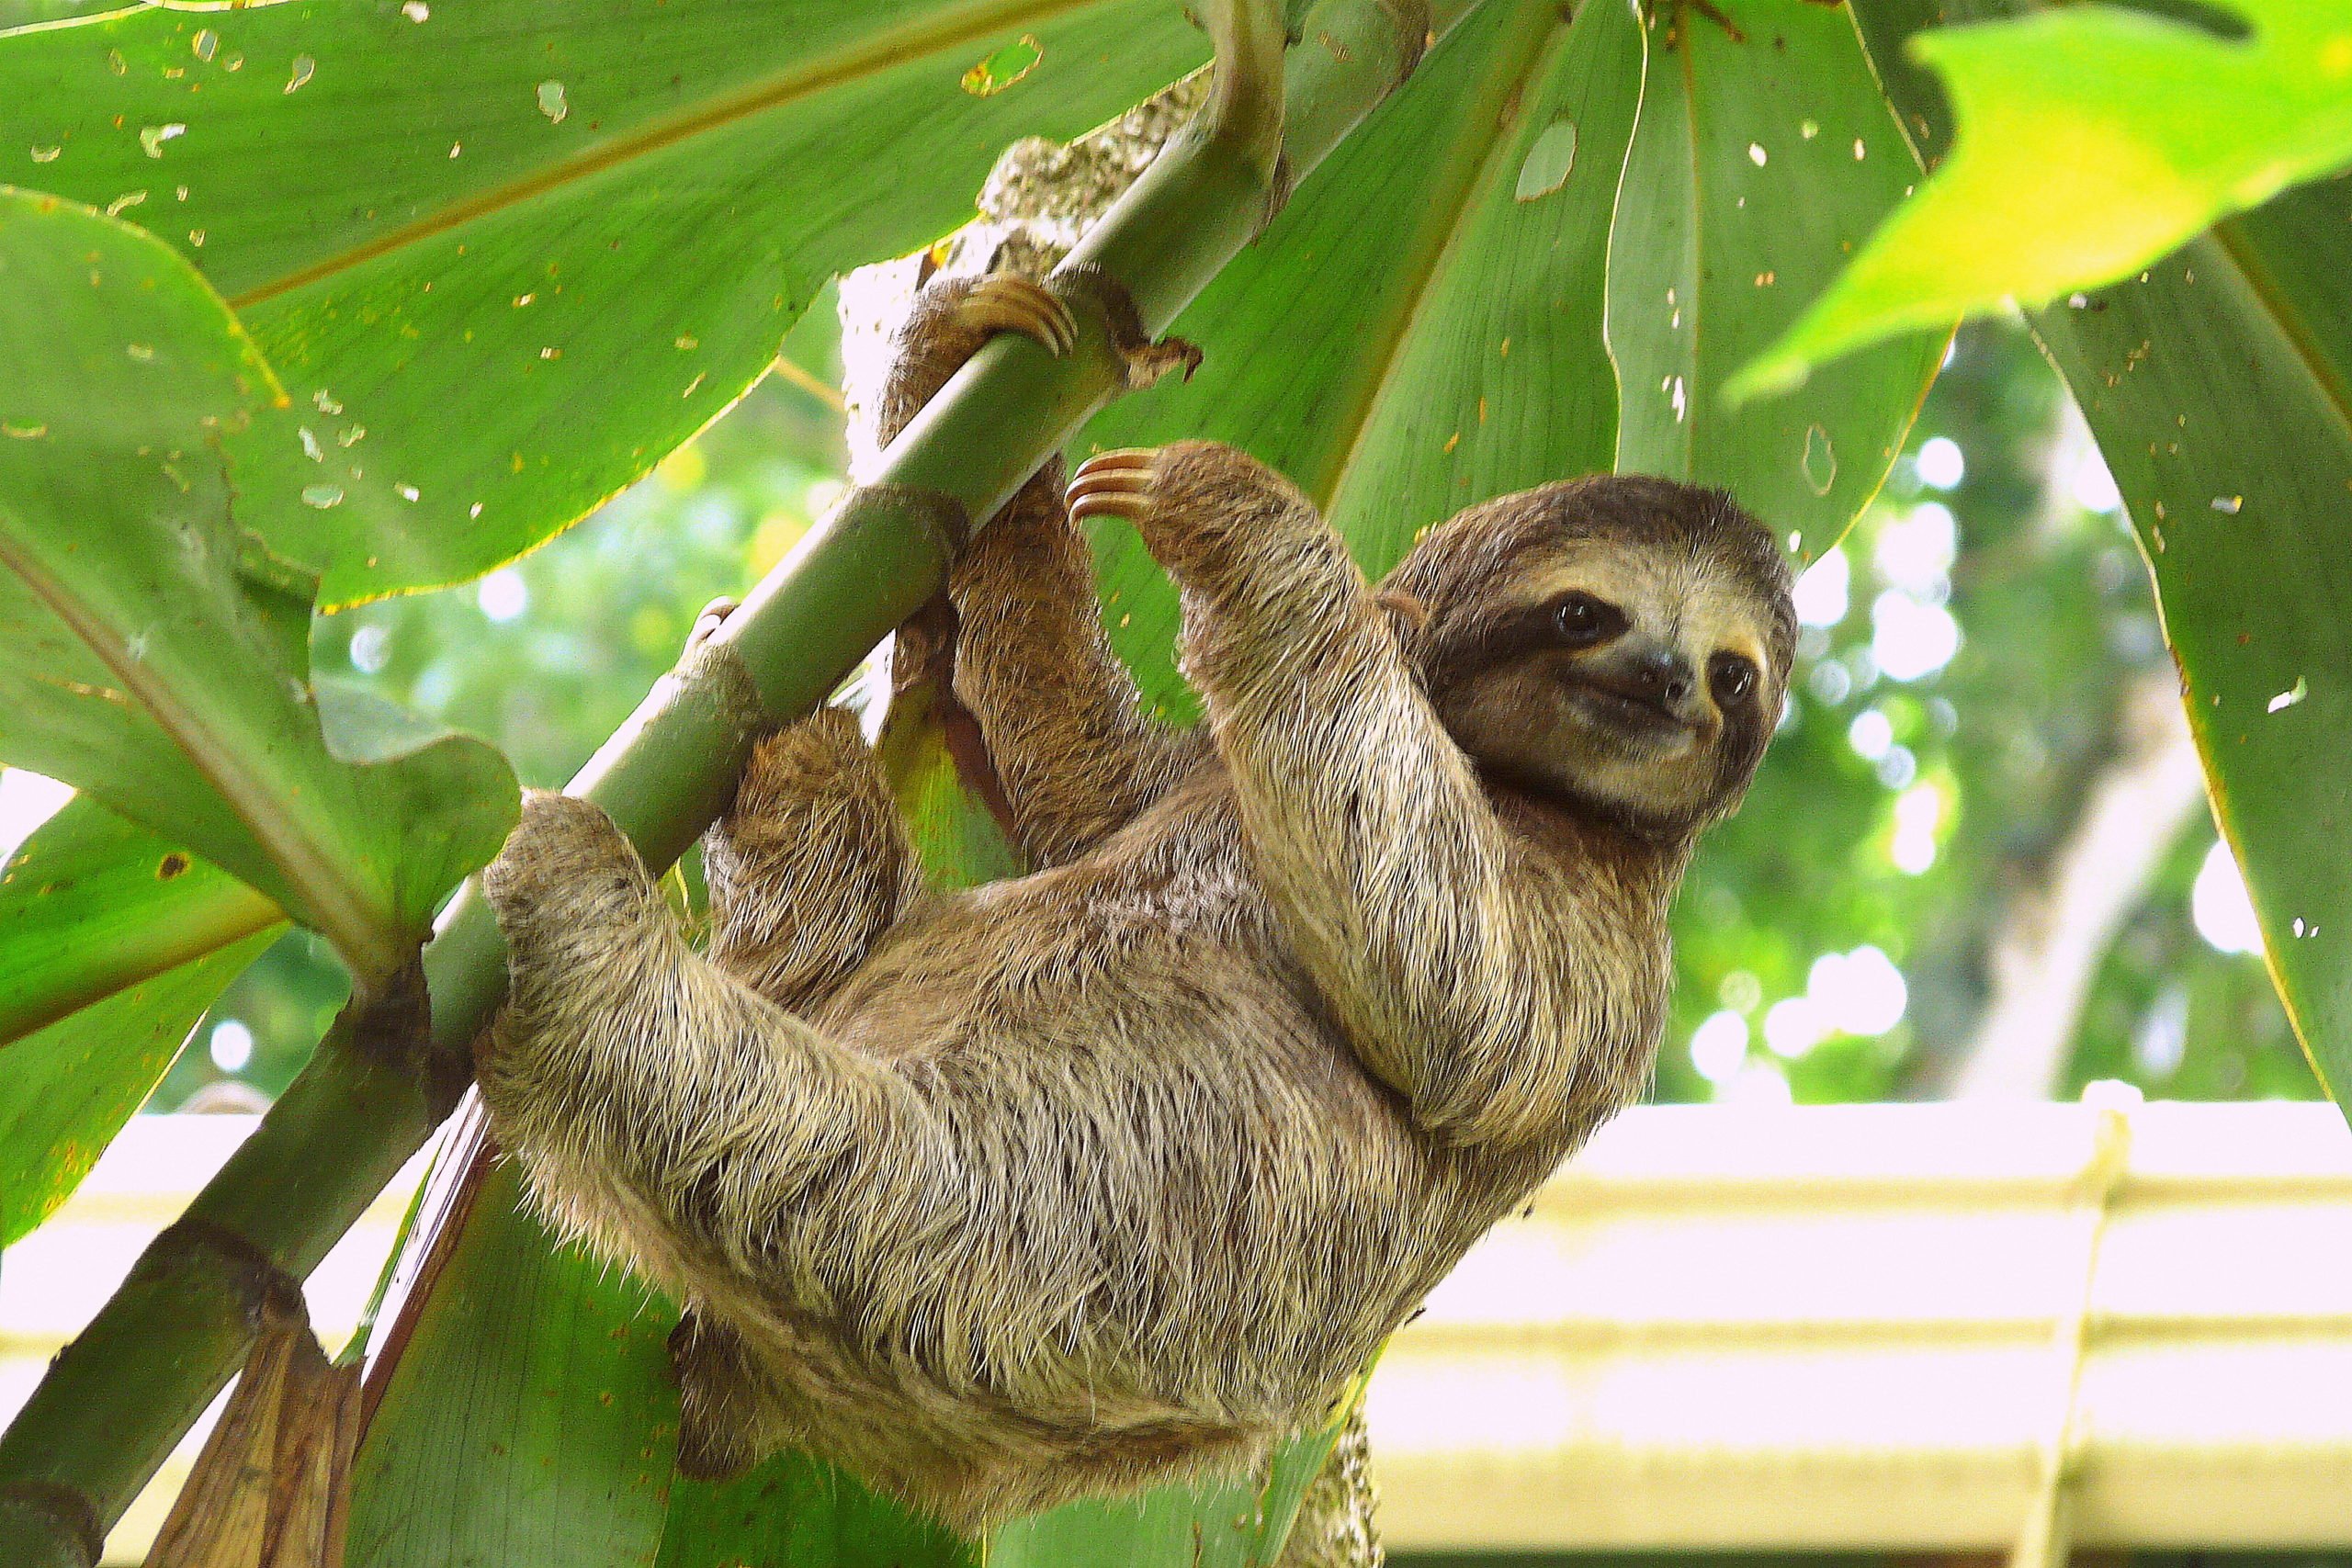 Learn About Sloths From Your Expert Guide On The Sloth Experience And Hot Springs At Arenal Volcano